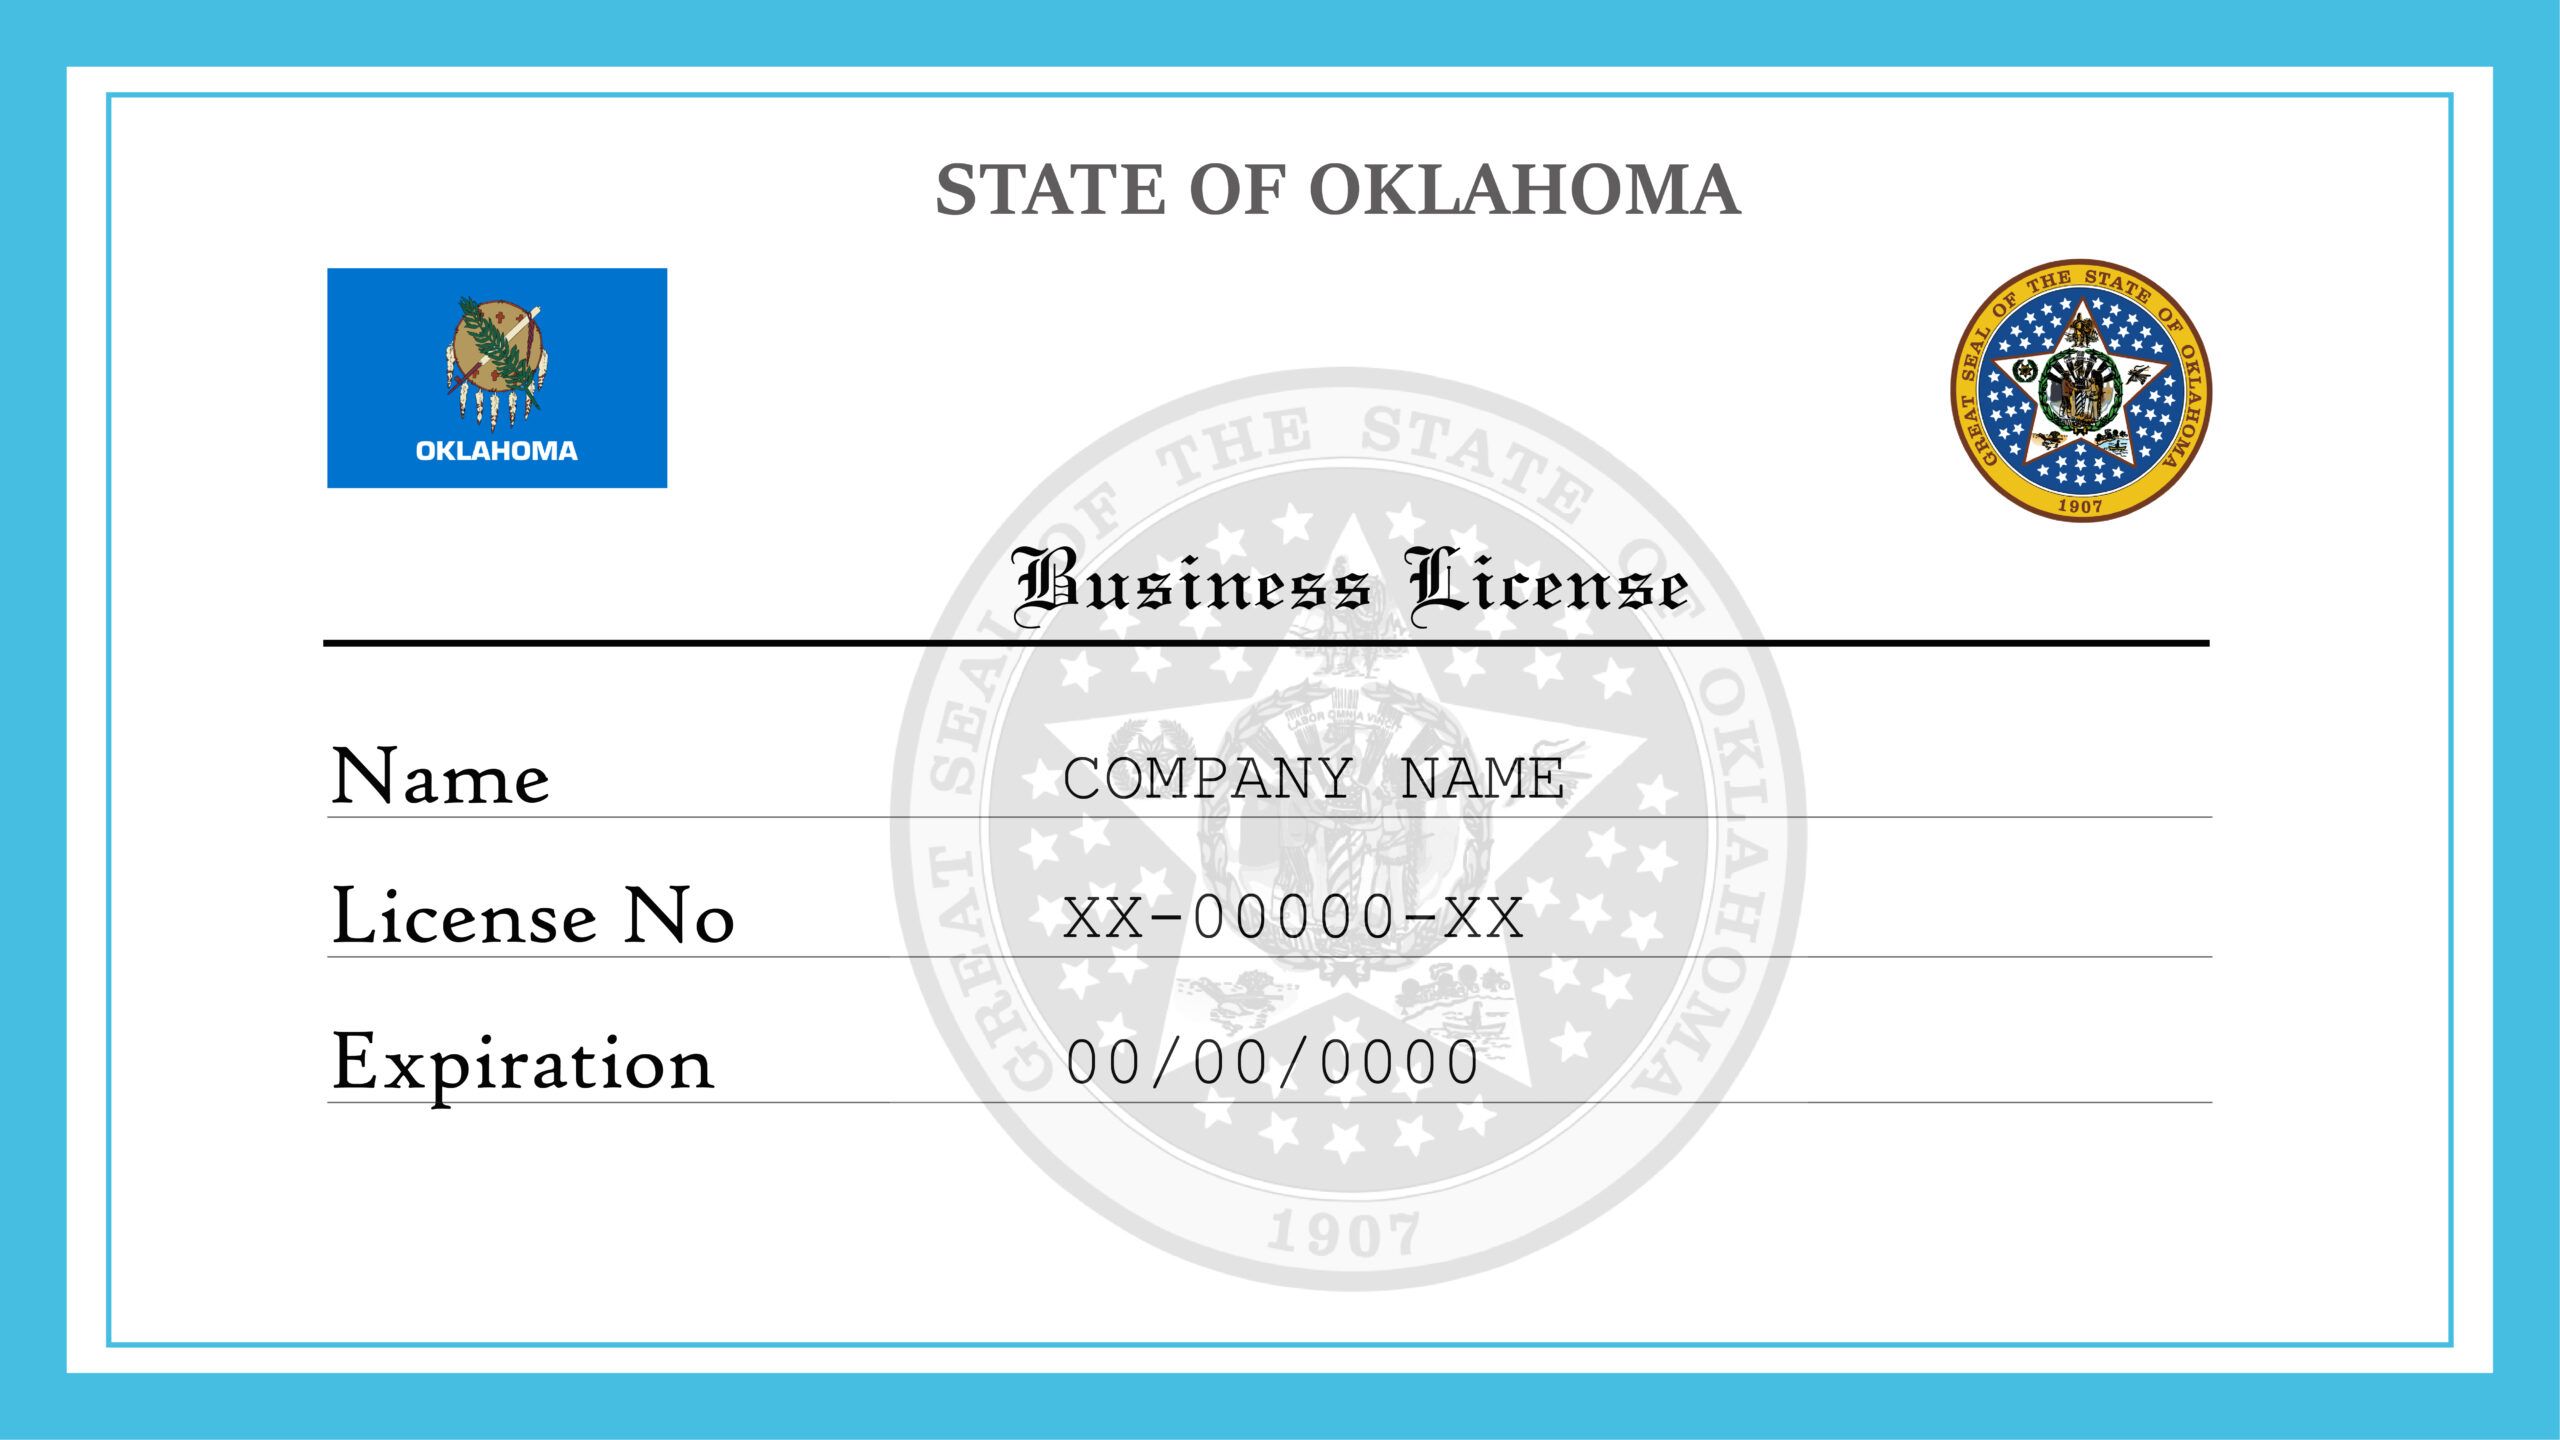 oklahoma-business-license-license-lookup